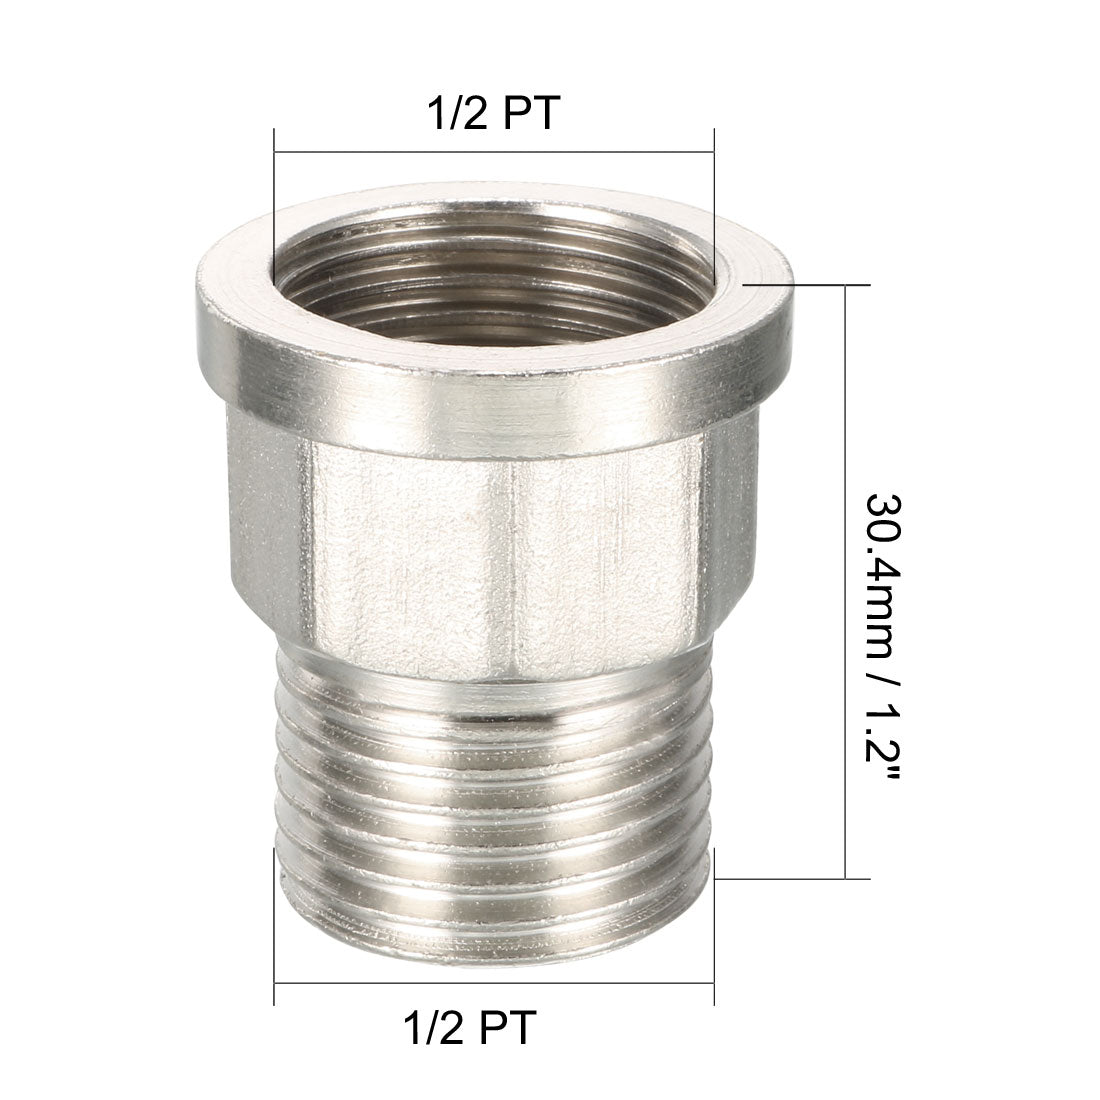 uxcell Uxcell Brass Garden Pipe Fitting Adapter 1/2 PT Male x 1/2 PT Female Coupling